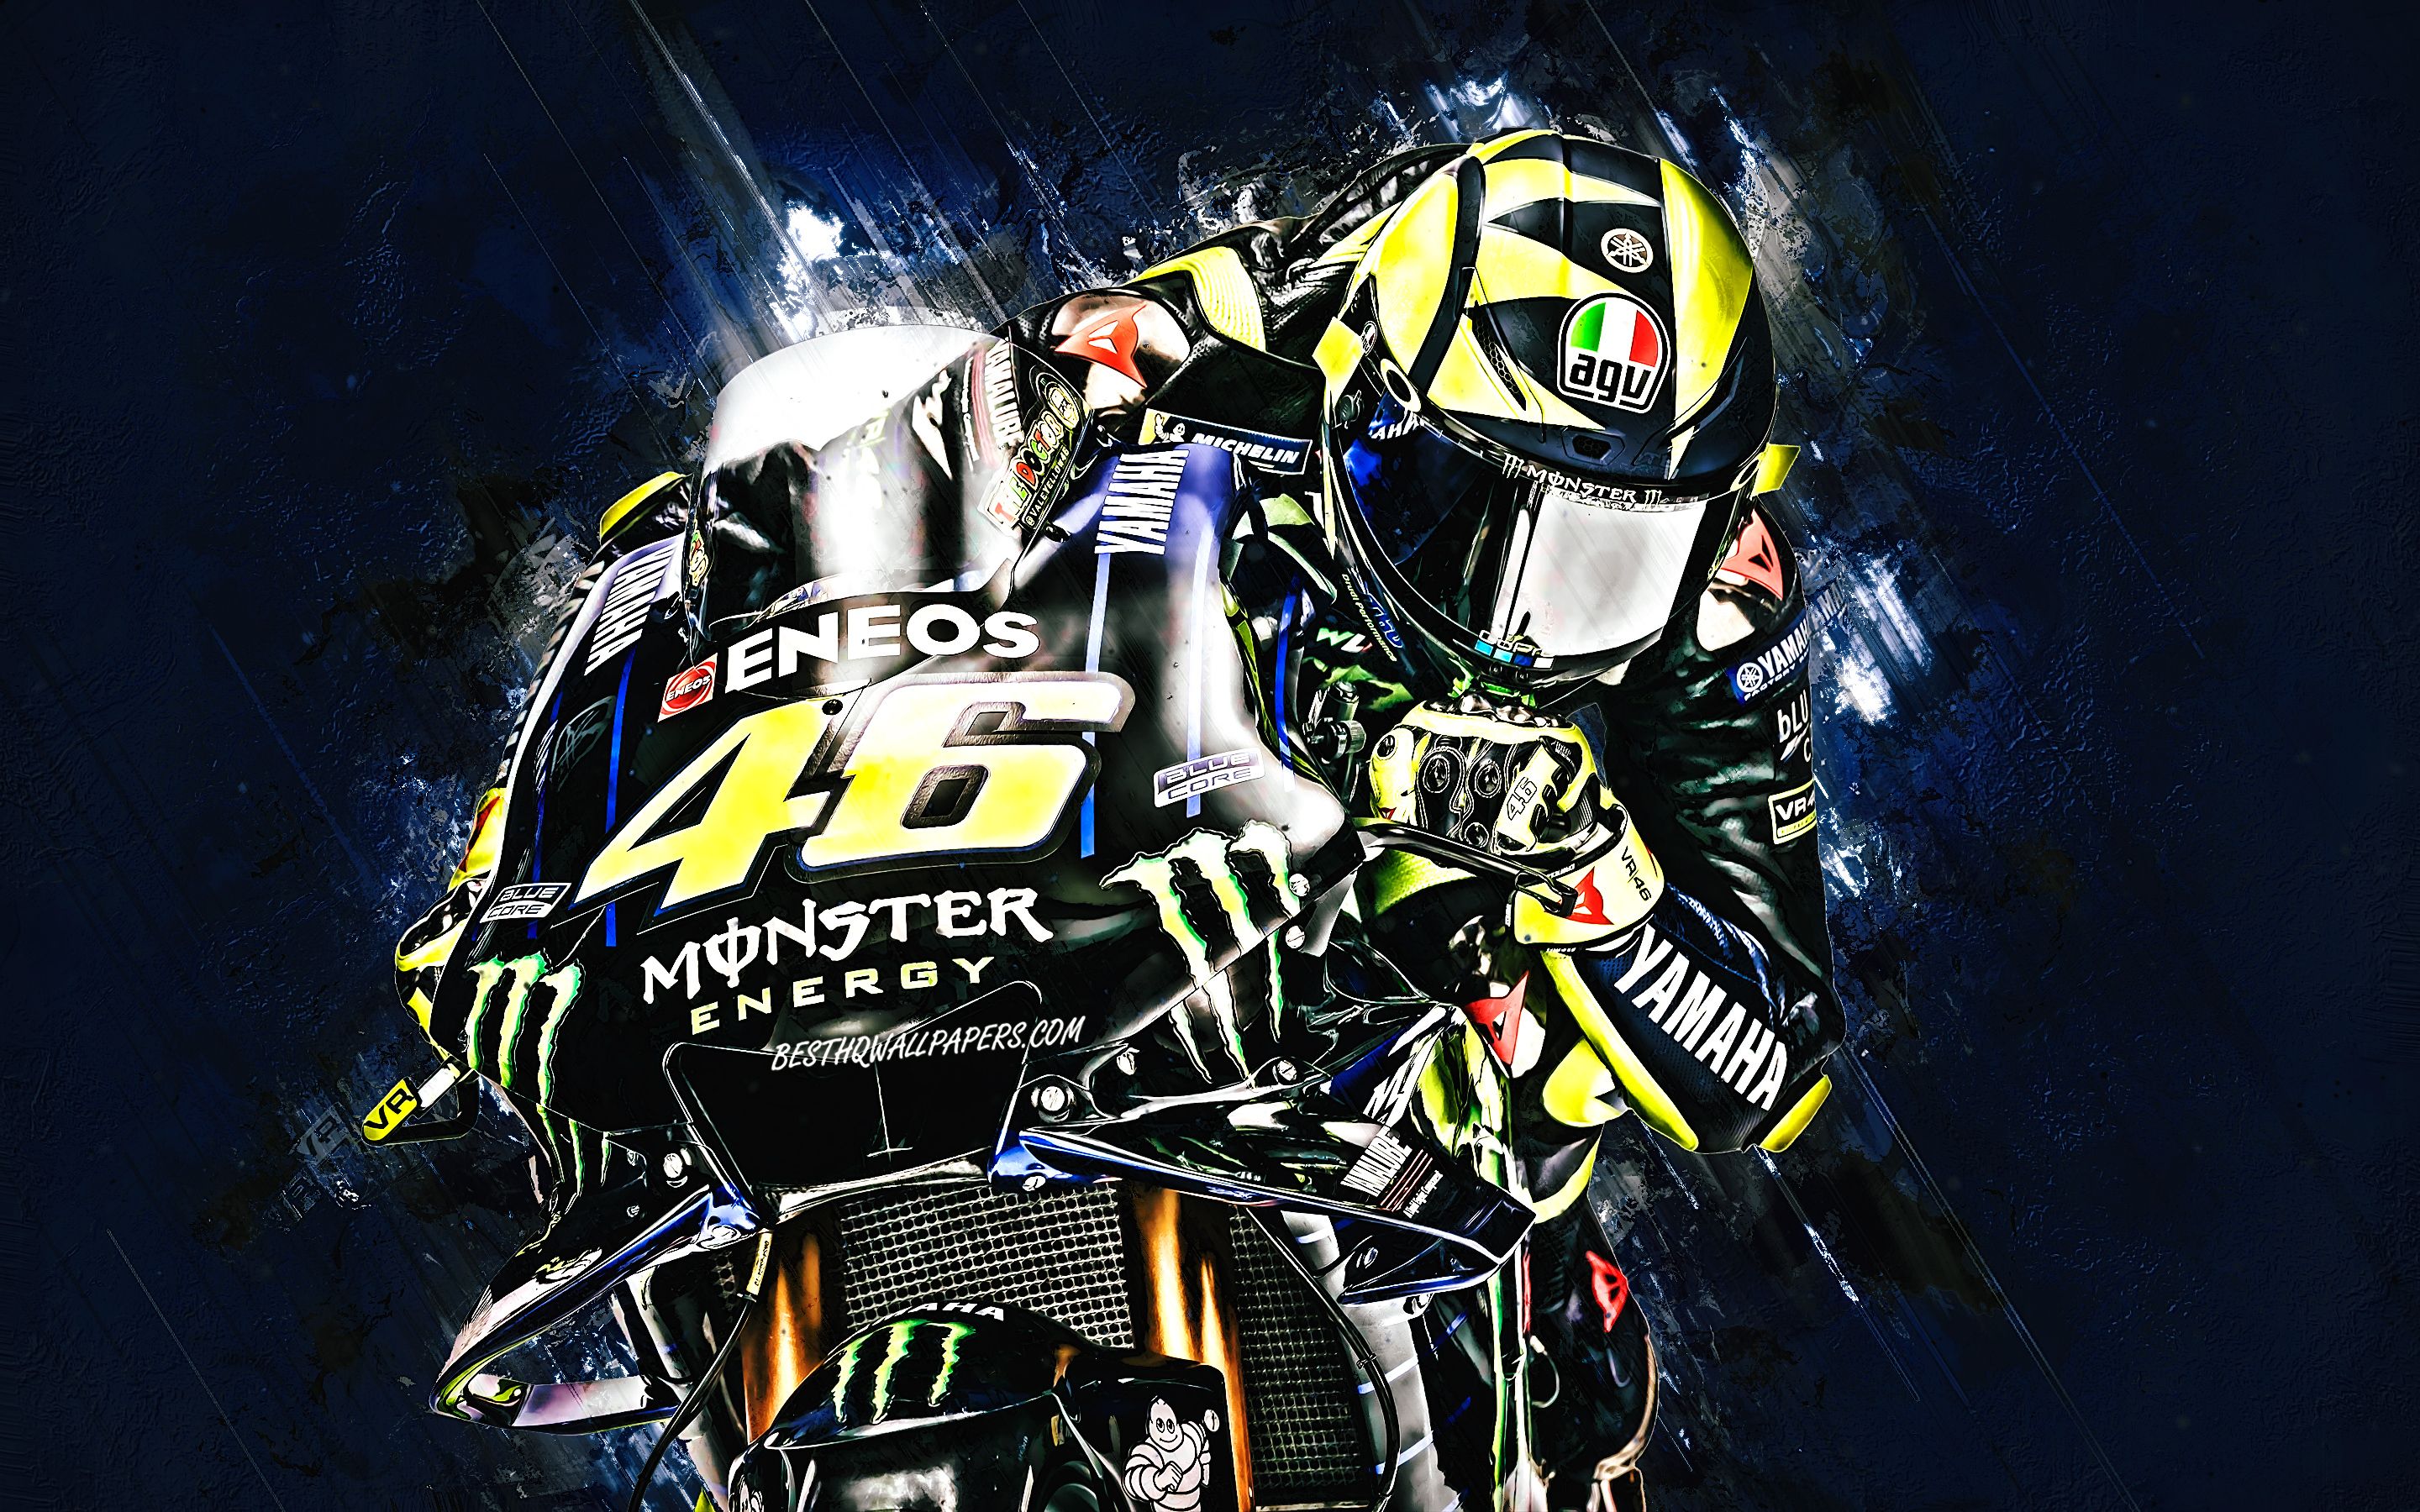 Download Wallpaper Valentino Rossi, MotoGP, Monster Energy Yamaha MotoGP, 46 Number, Yamaha YZR M Italian Professional Road Racer For Desktop With Resolution 2880x1800. High Quality HD Picture Wallpaper